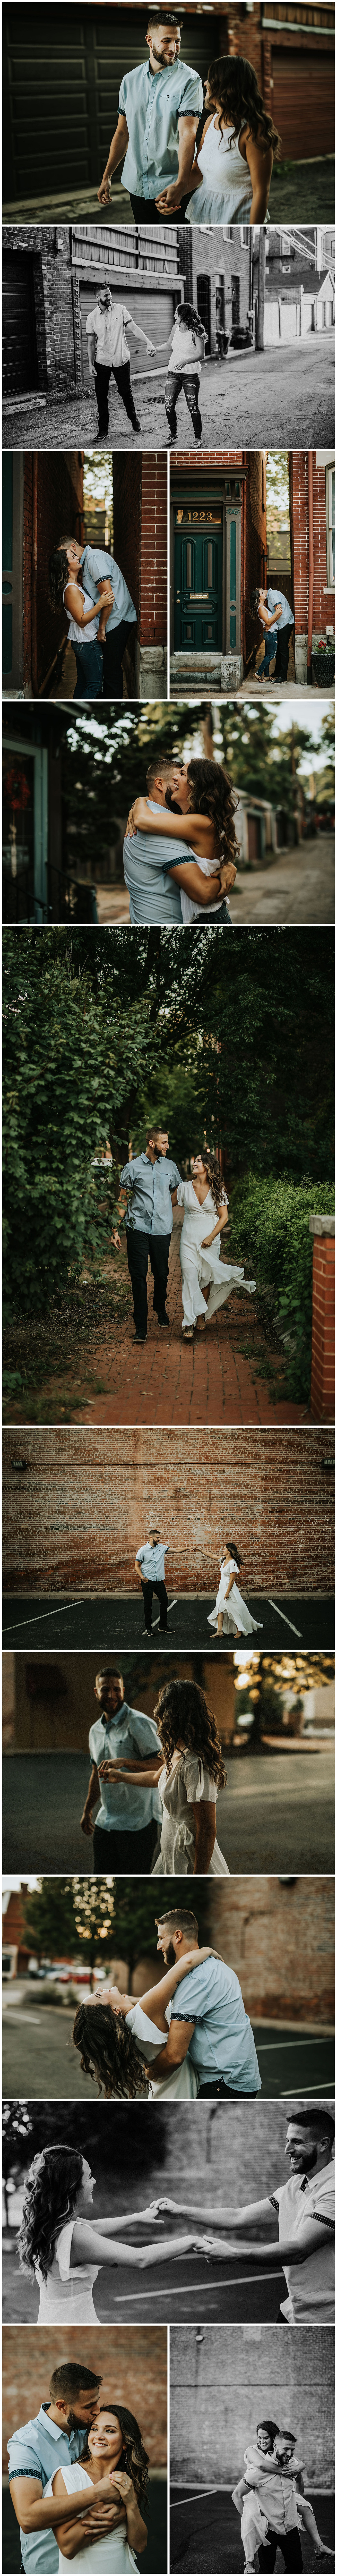 01 mexican war streets engagement session.jpg